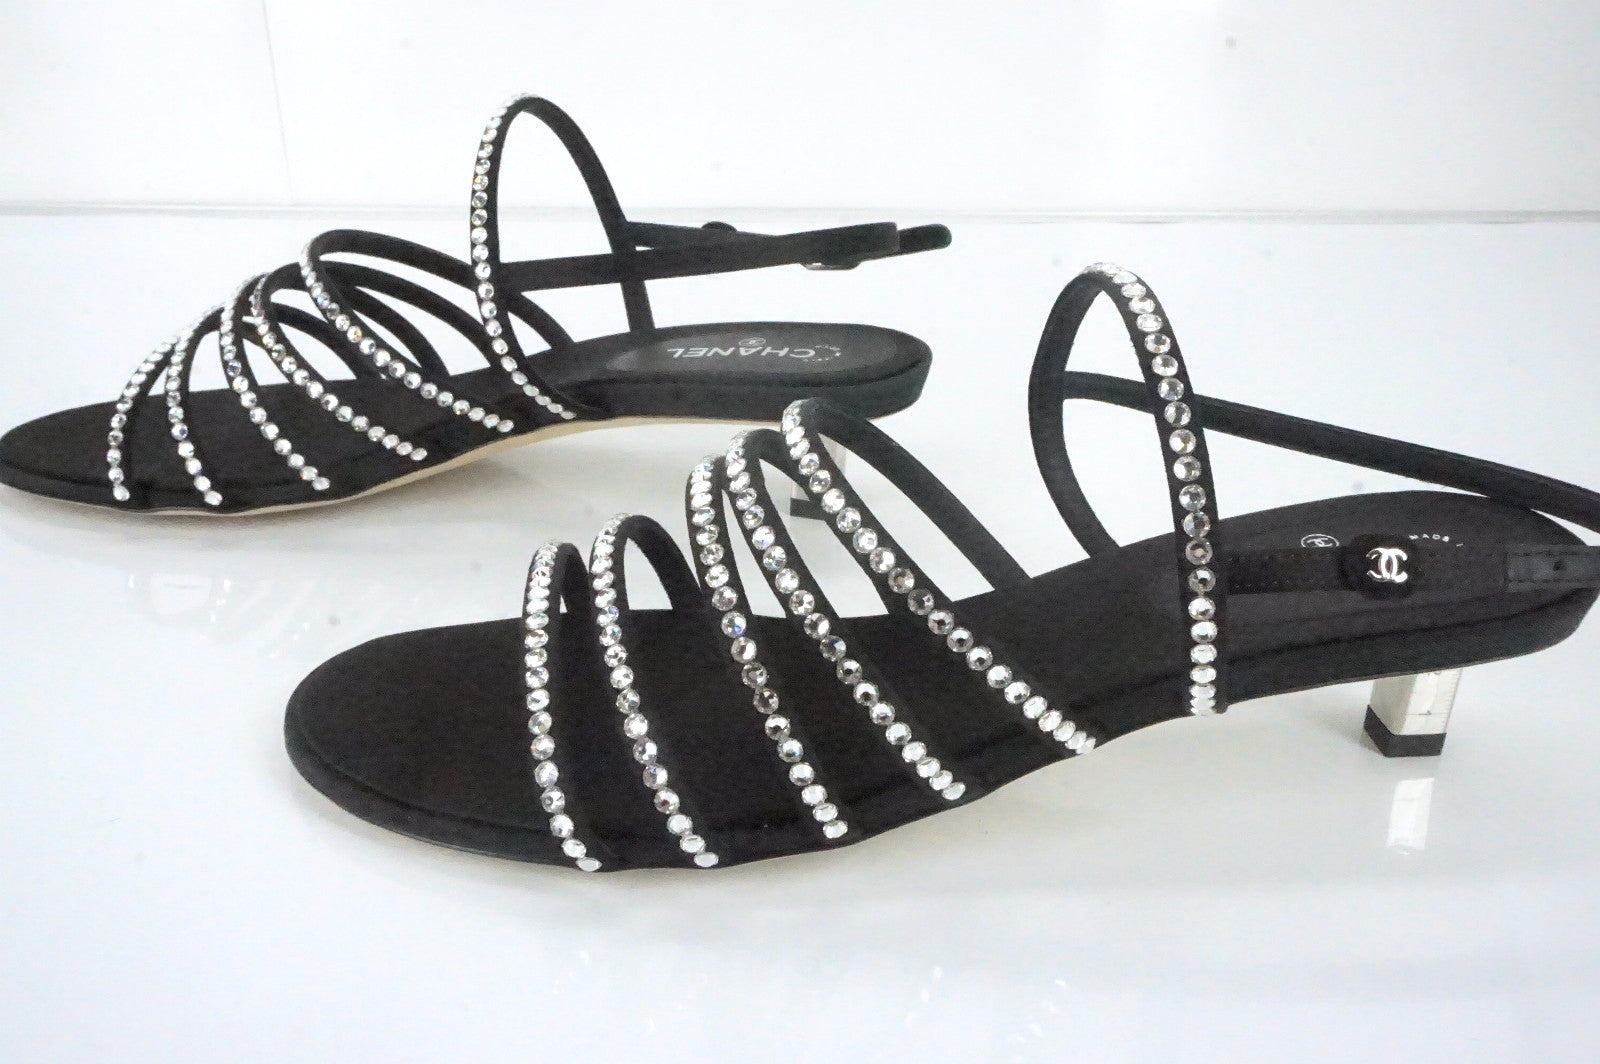 Chanel Crystal Caged Strap Kitten Heel Sandals Size 38 Logo New CC $1075